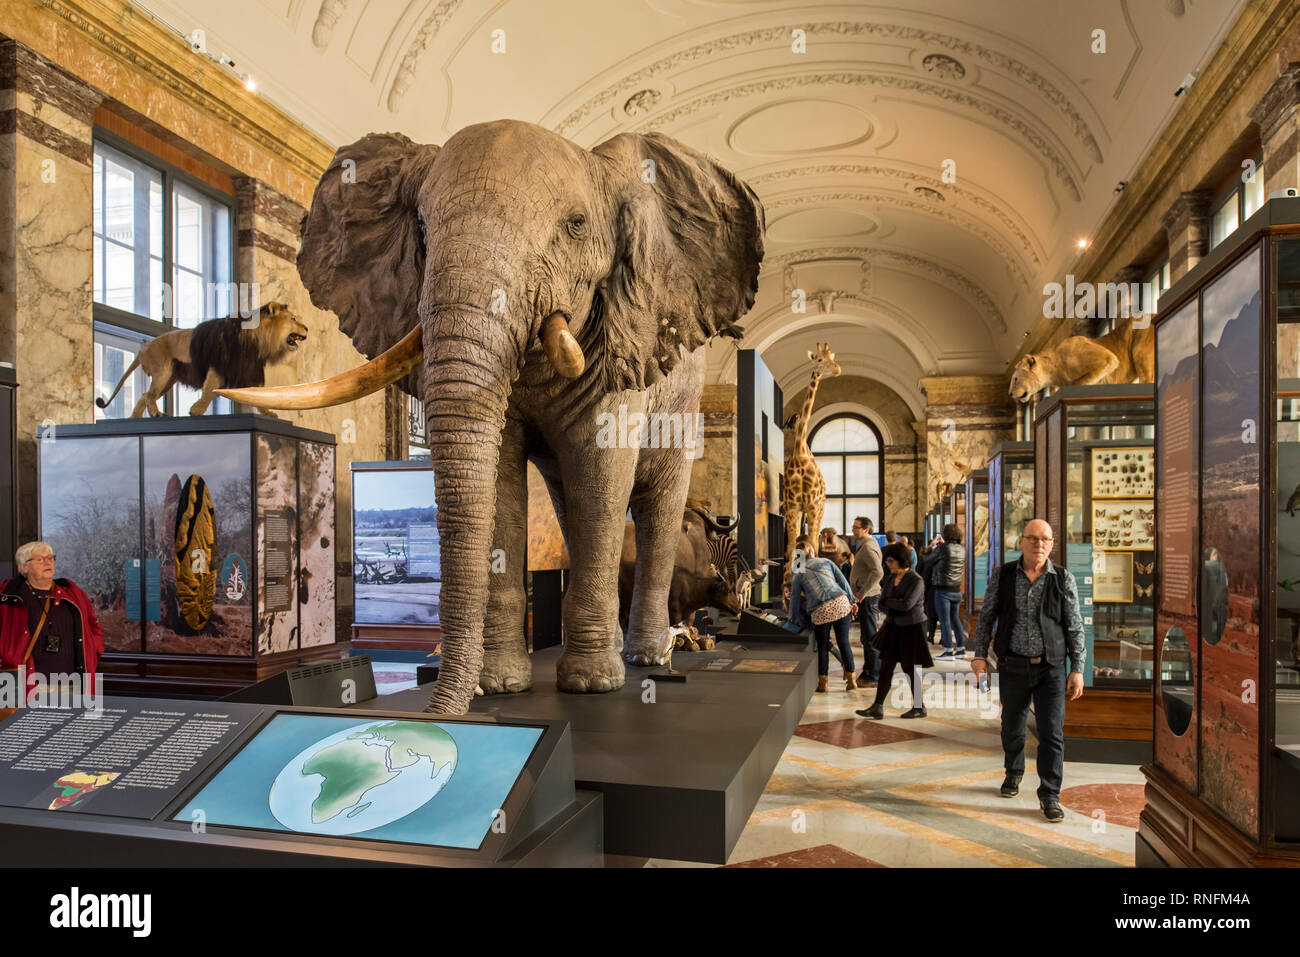 Stuffed African animals in the AfricaMuseum / Royal Museum for Central Africa, ethnography and natural history museum at Tervuren, Belgium Stock Photo